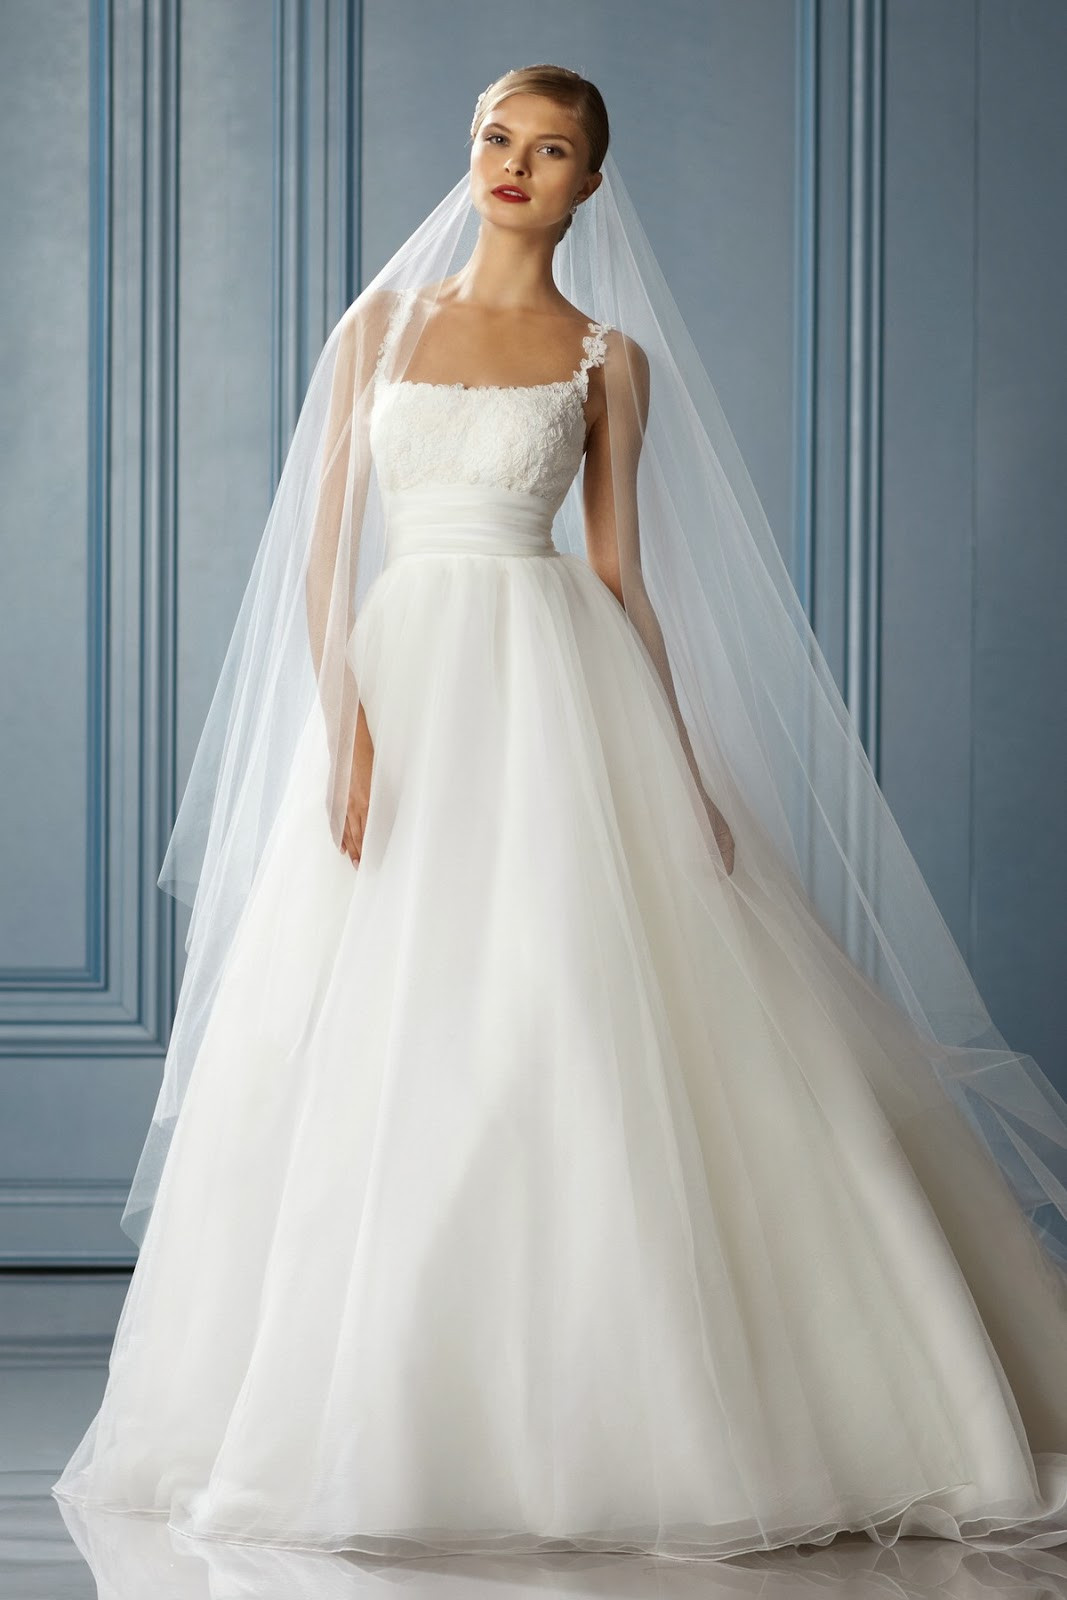 Expensive Wedding Dresses
 Link Camp Wedding Dress Collection 2013 22 Expensive